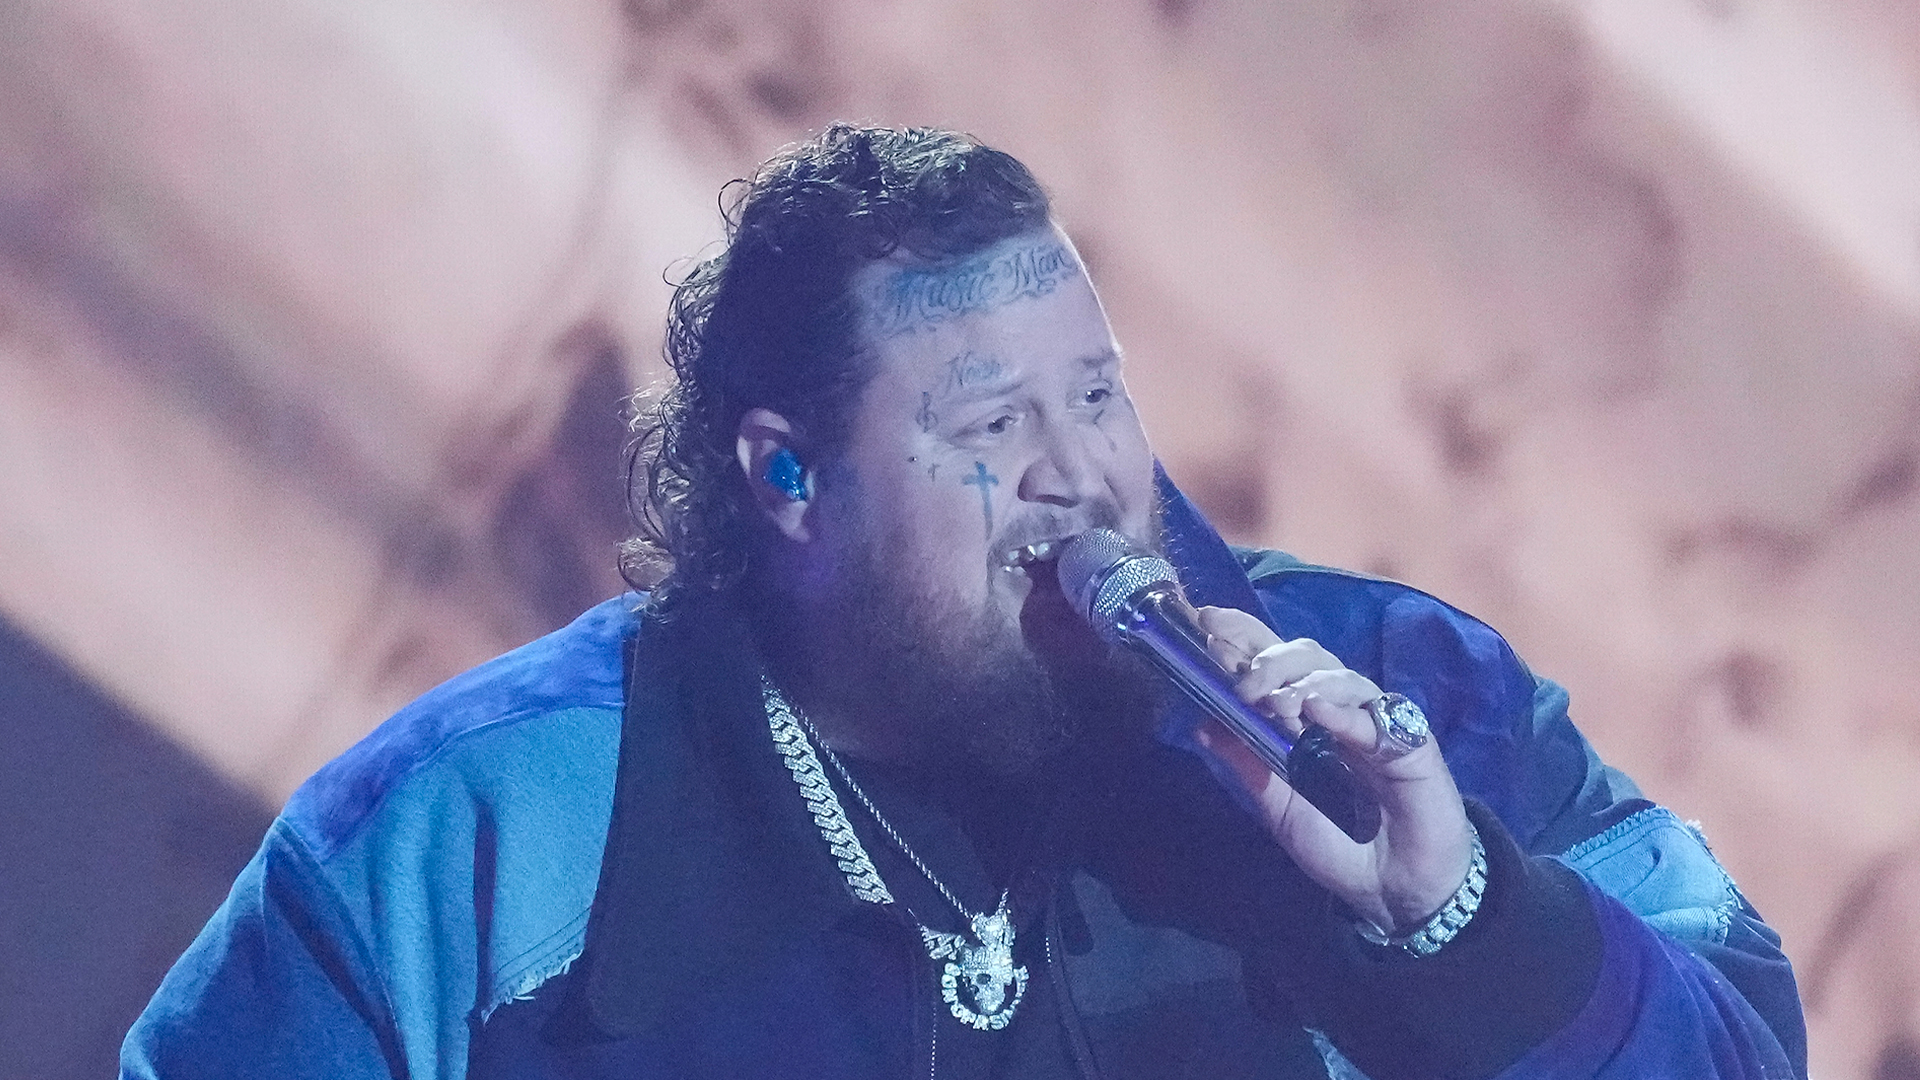 Jelly Roll fans gush ‘he looks amazing’ after singer’s weight loss as he packs on the PDA with wife Bunnie Xo on stage [Video]